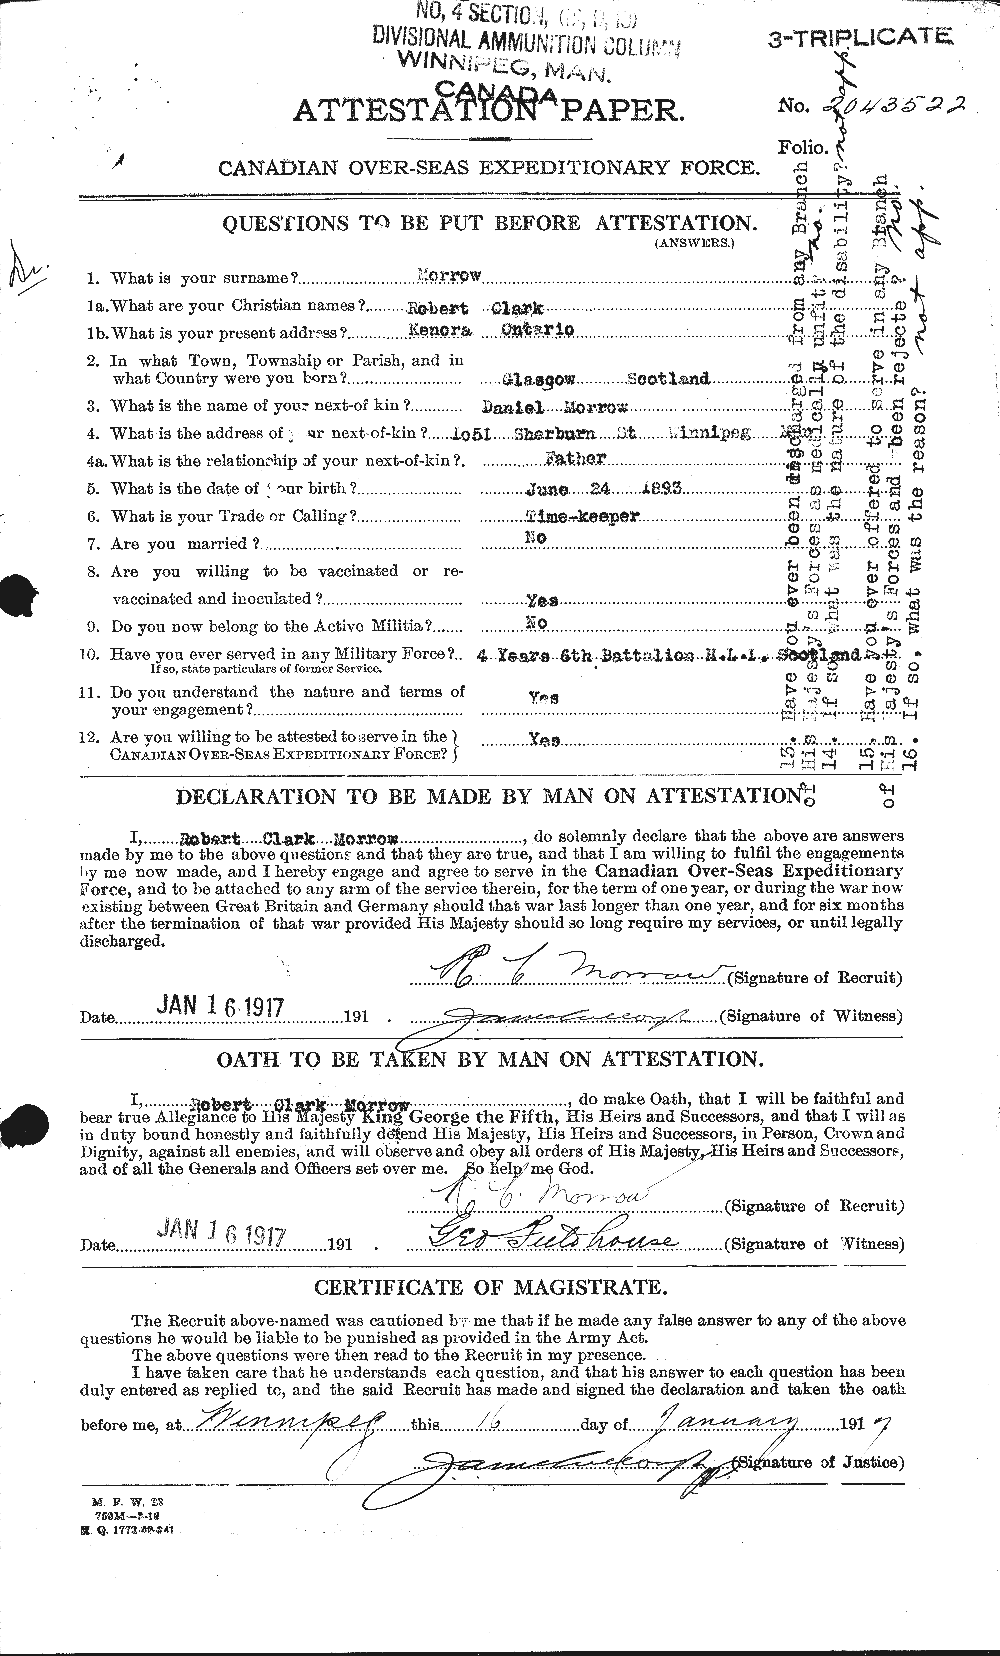 Personnel Records of the First World War - CEF 504307a